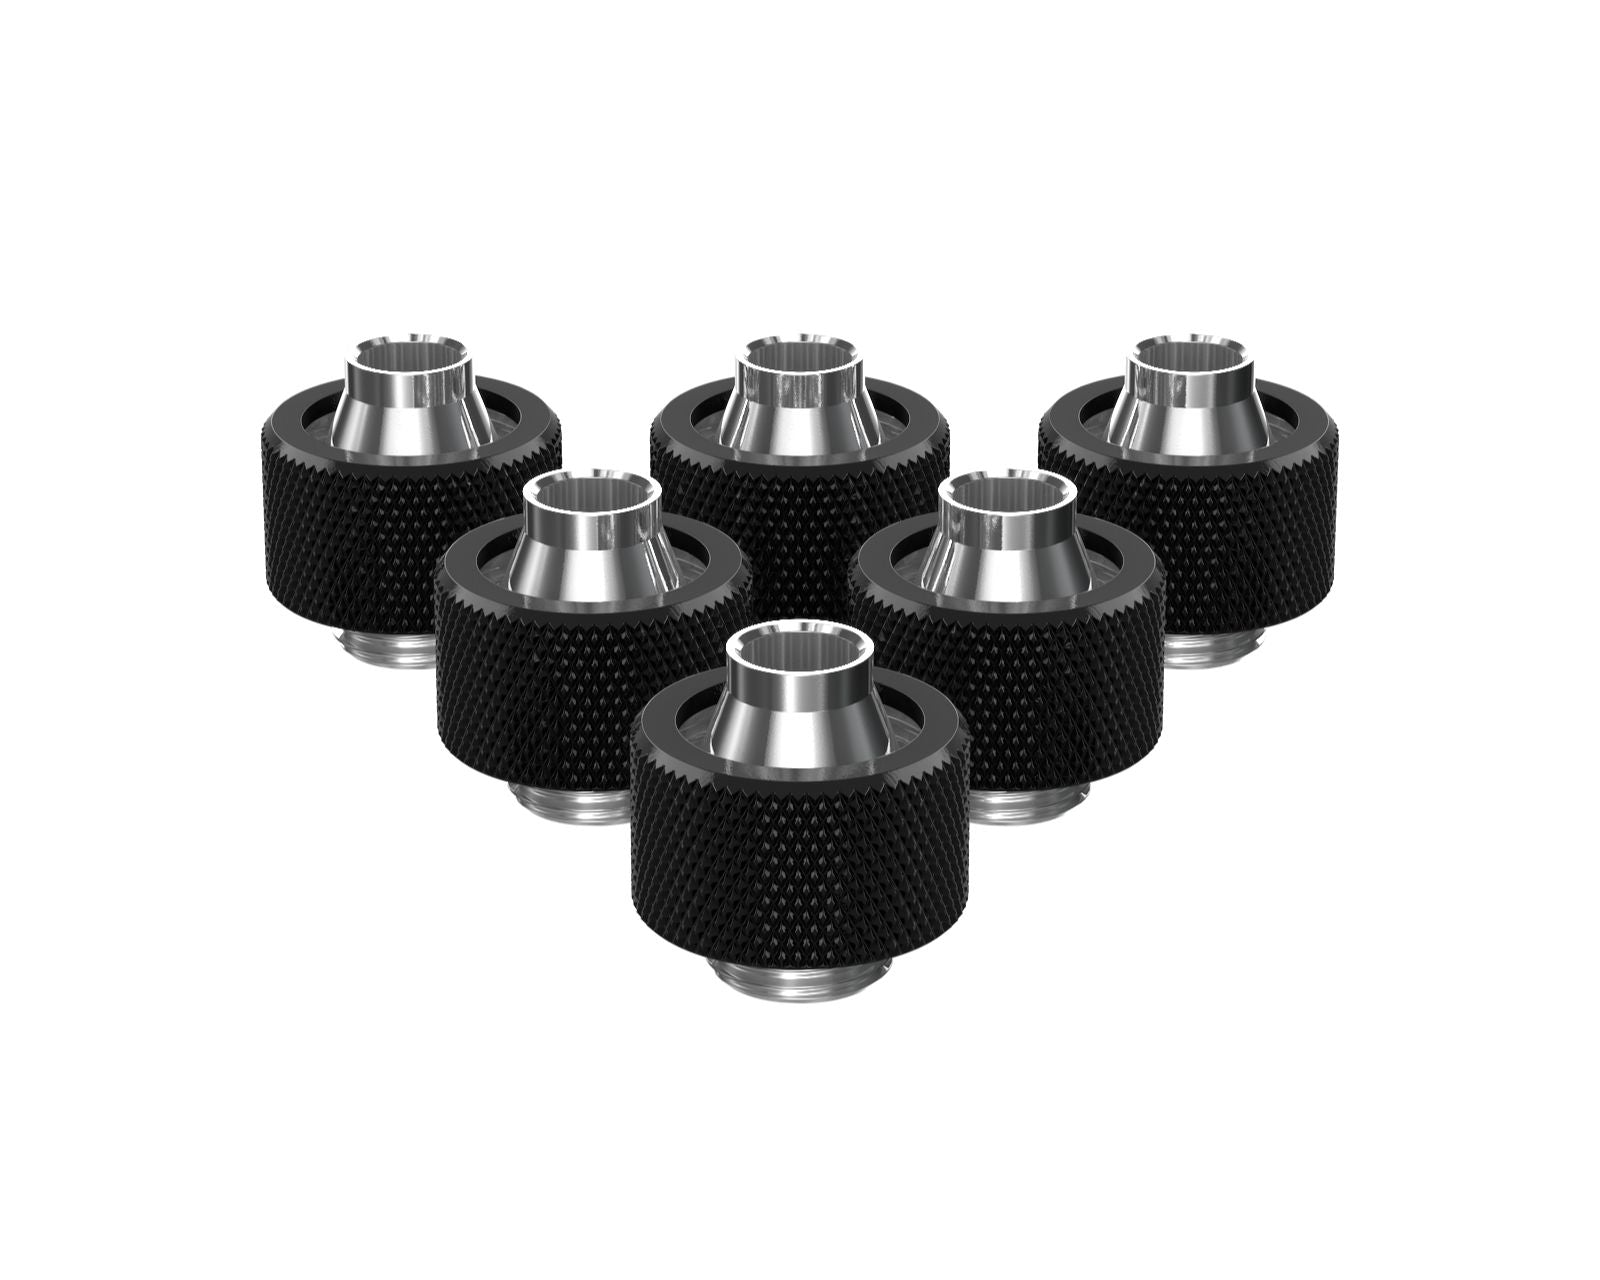 PrimoChill SecureFit SX - Premium Compression Fitting For 7/16in ID x 5/8in OD Flexible Tubing 6 Pack (F-SFSX758-6) - Available in 20+ Colors, Custom Watercooling Loop Ready - Satin Black